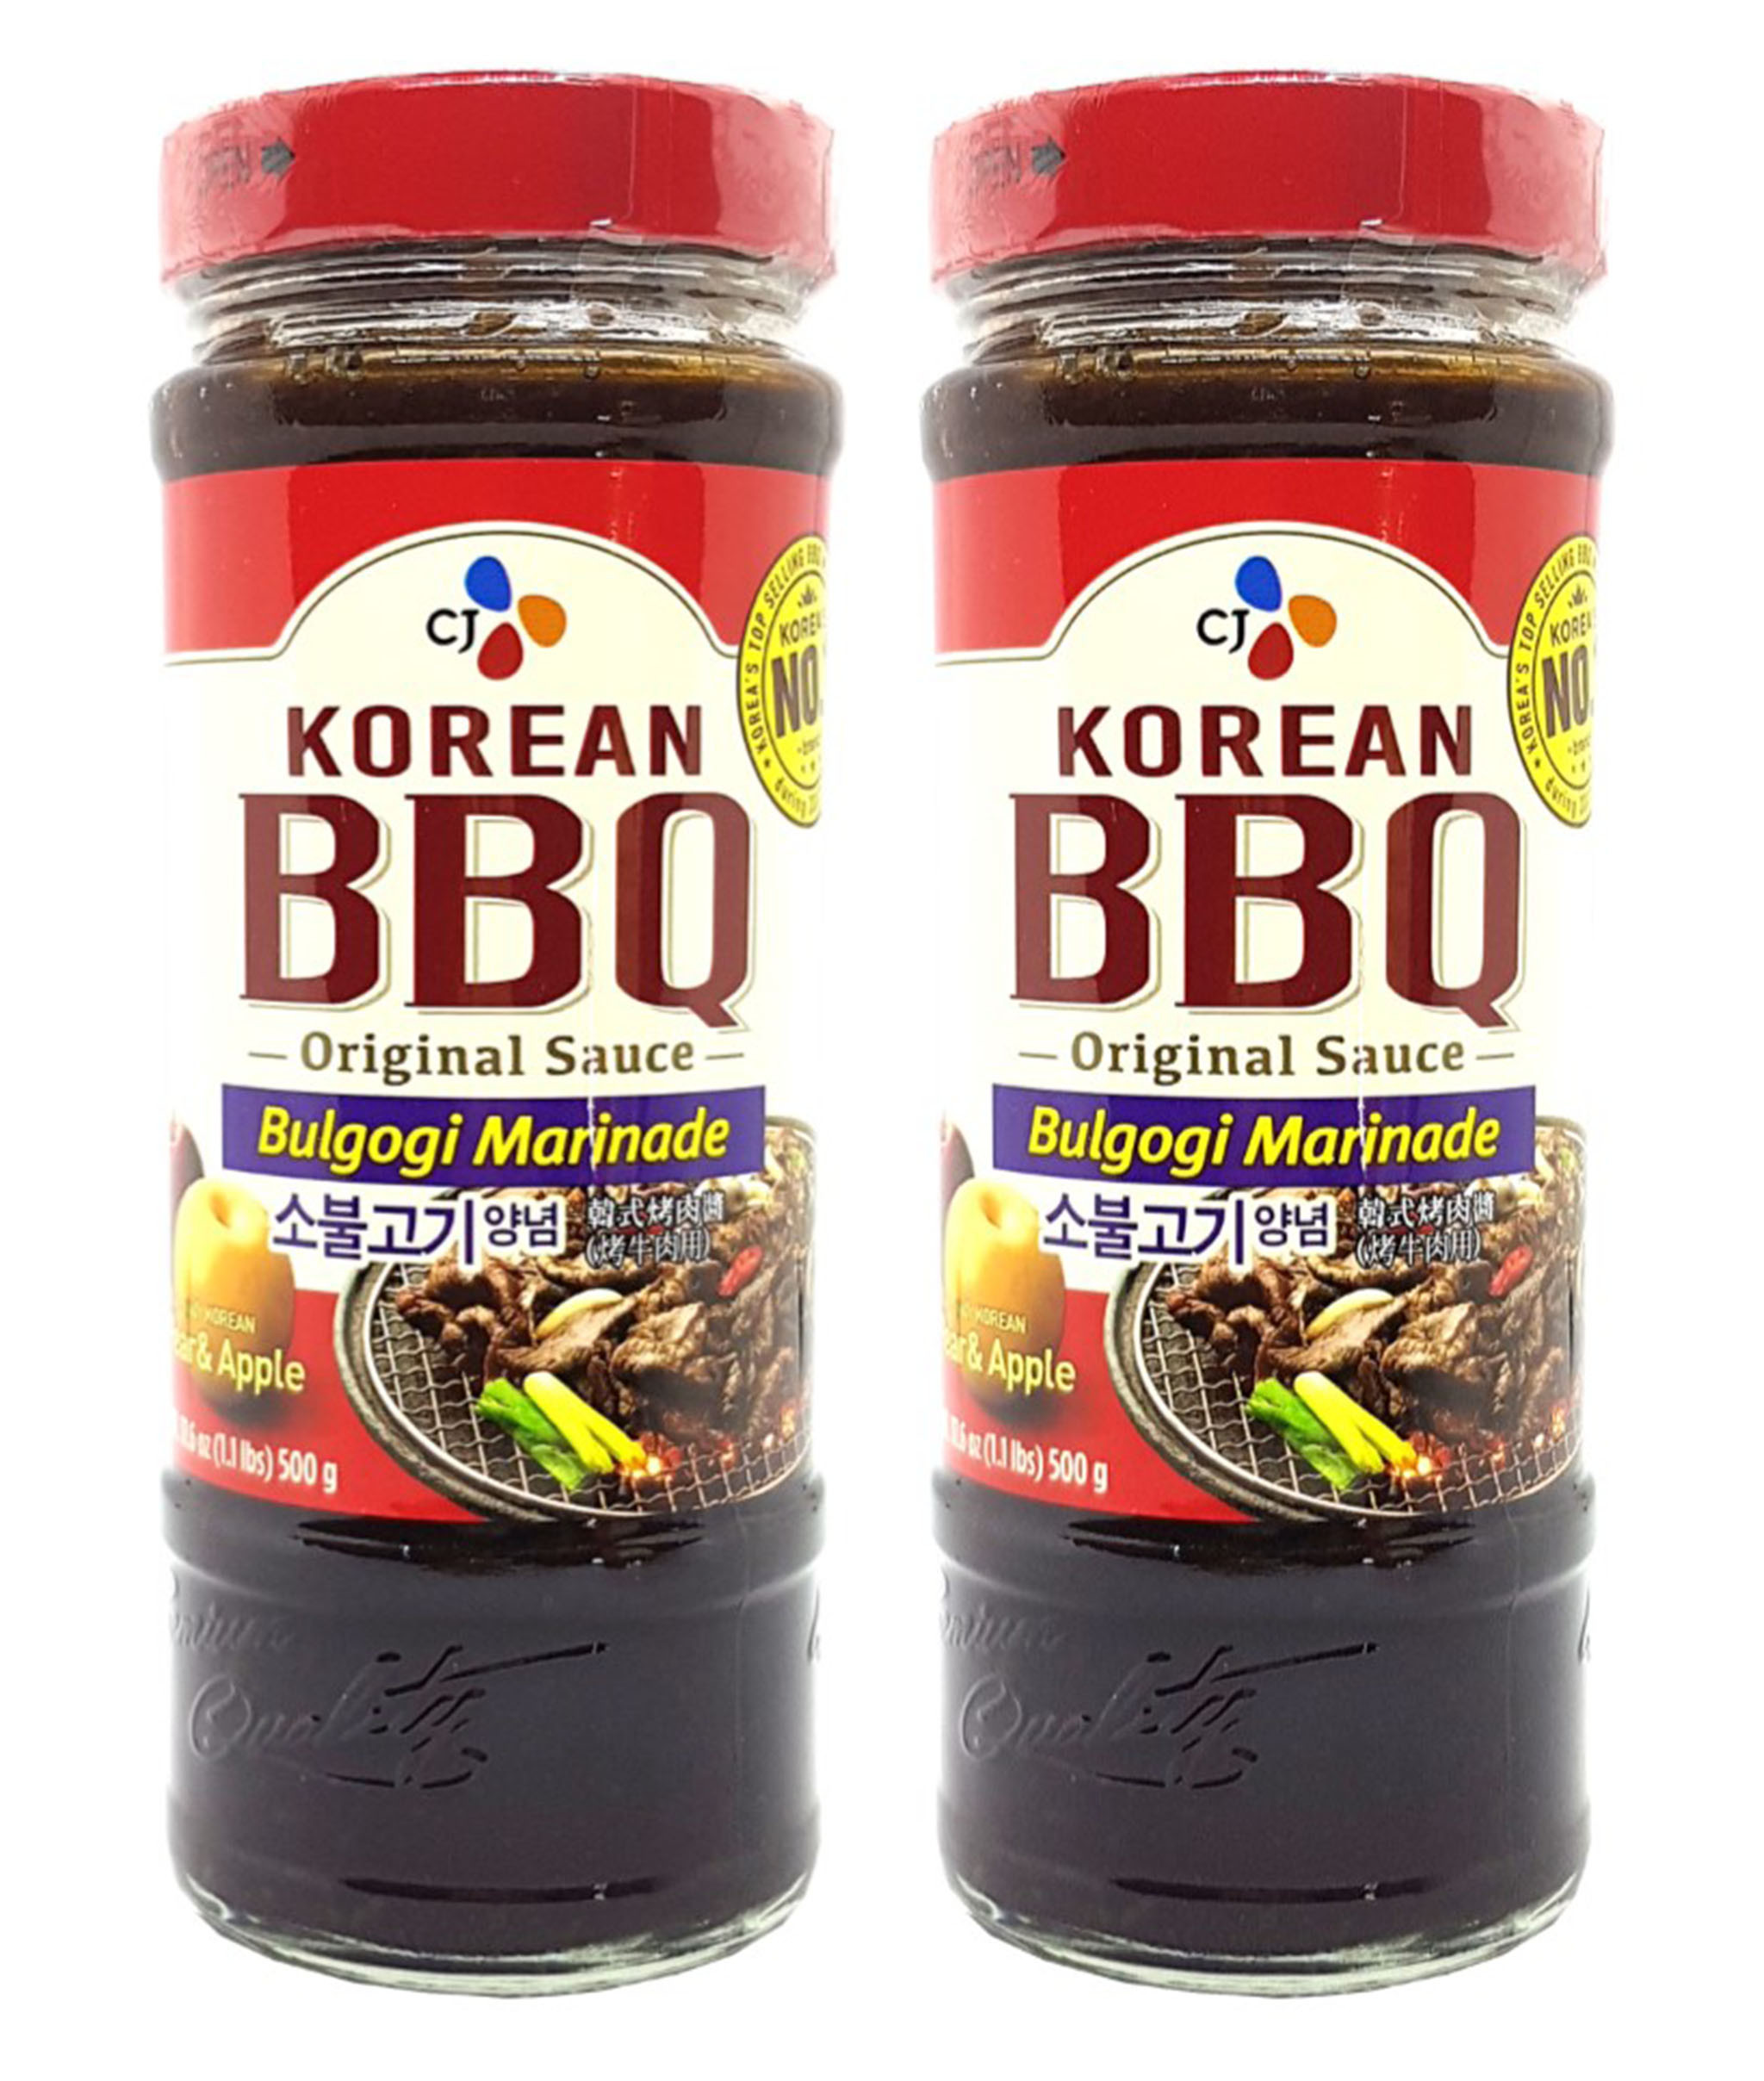 Don’t Miss Our 15 Most Shared Korean Bbq Sauce